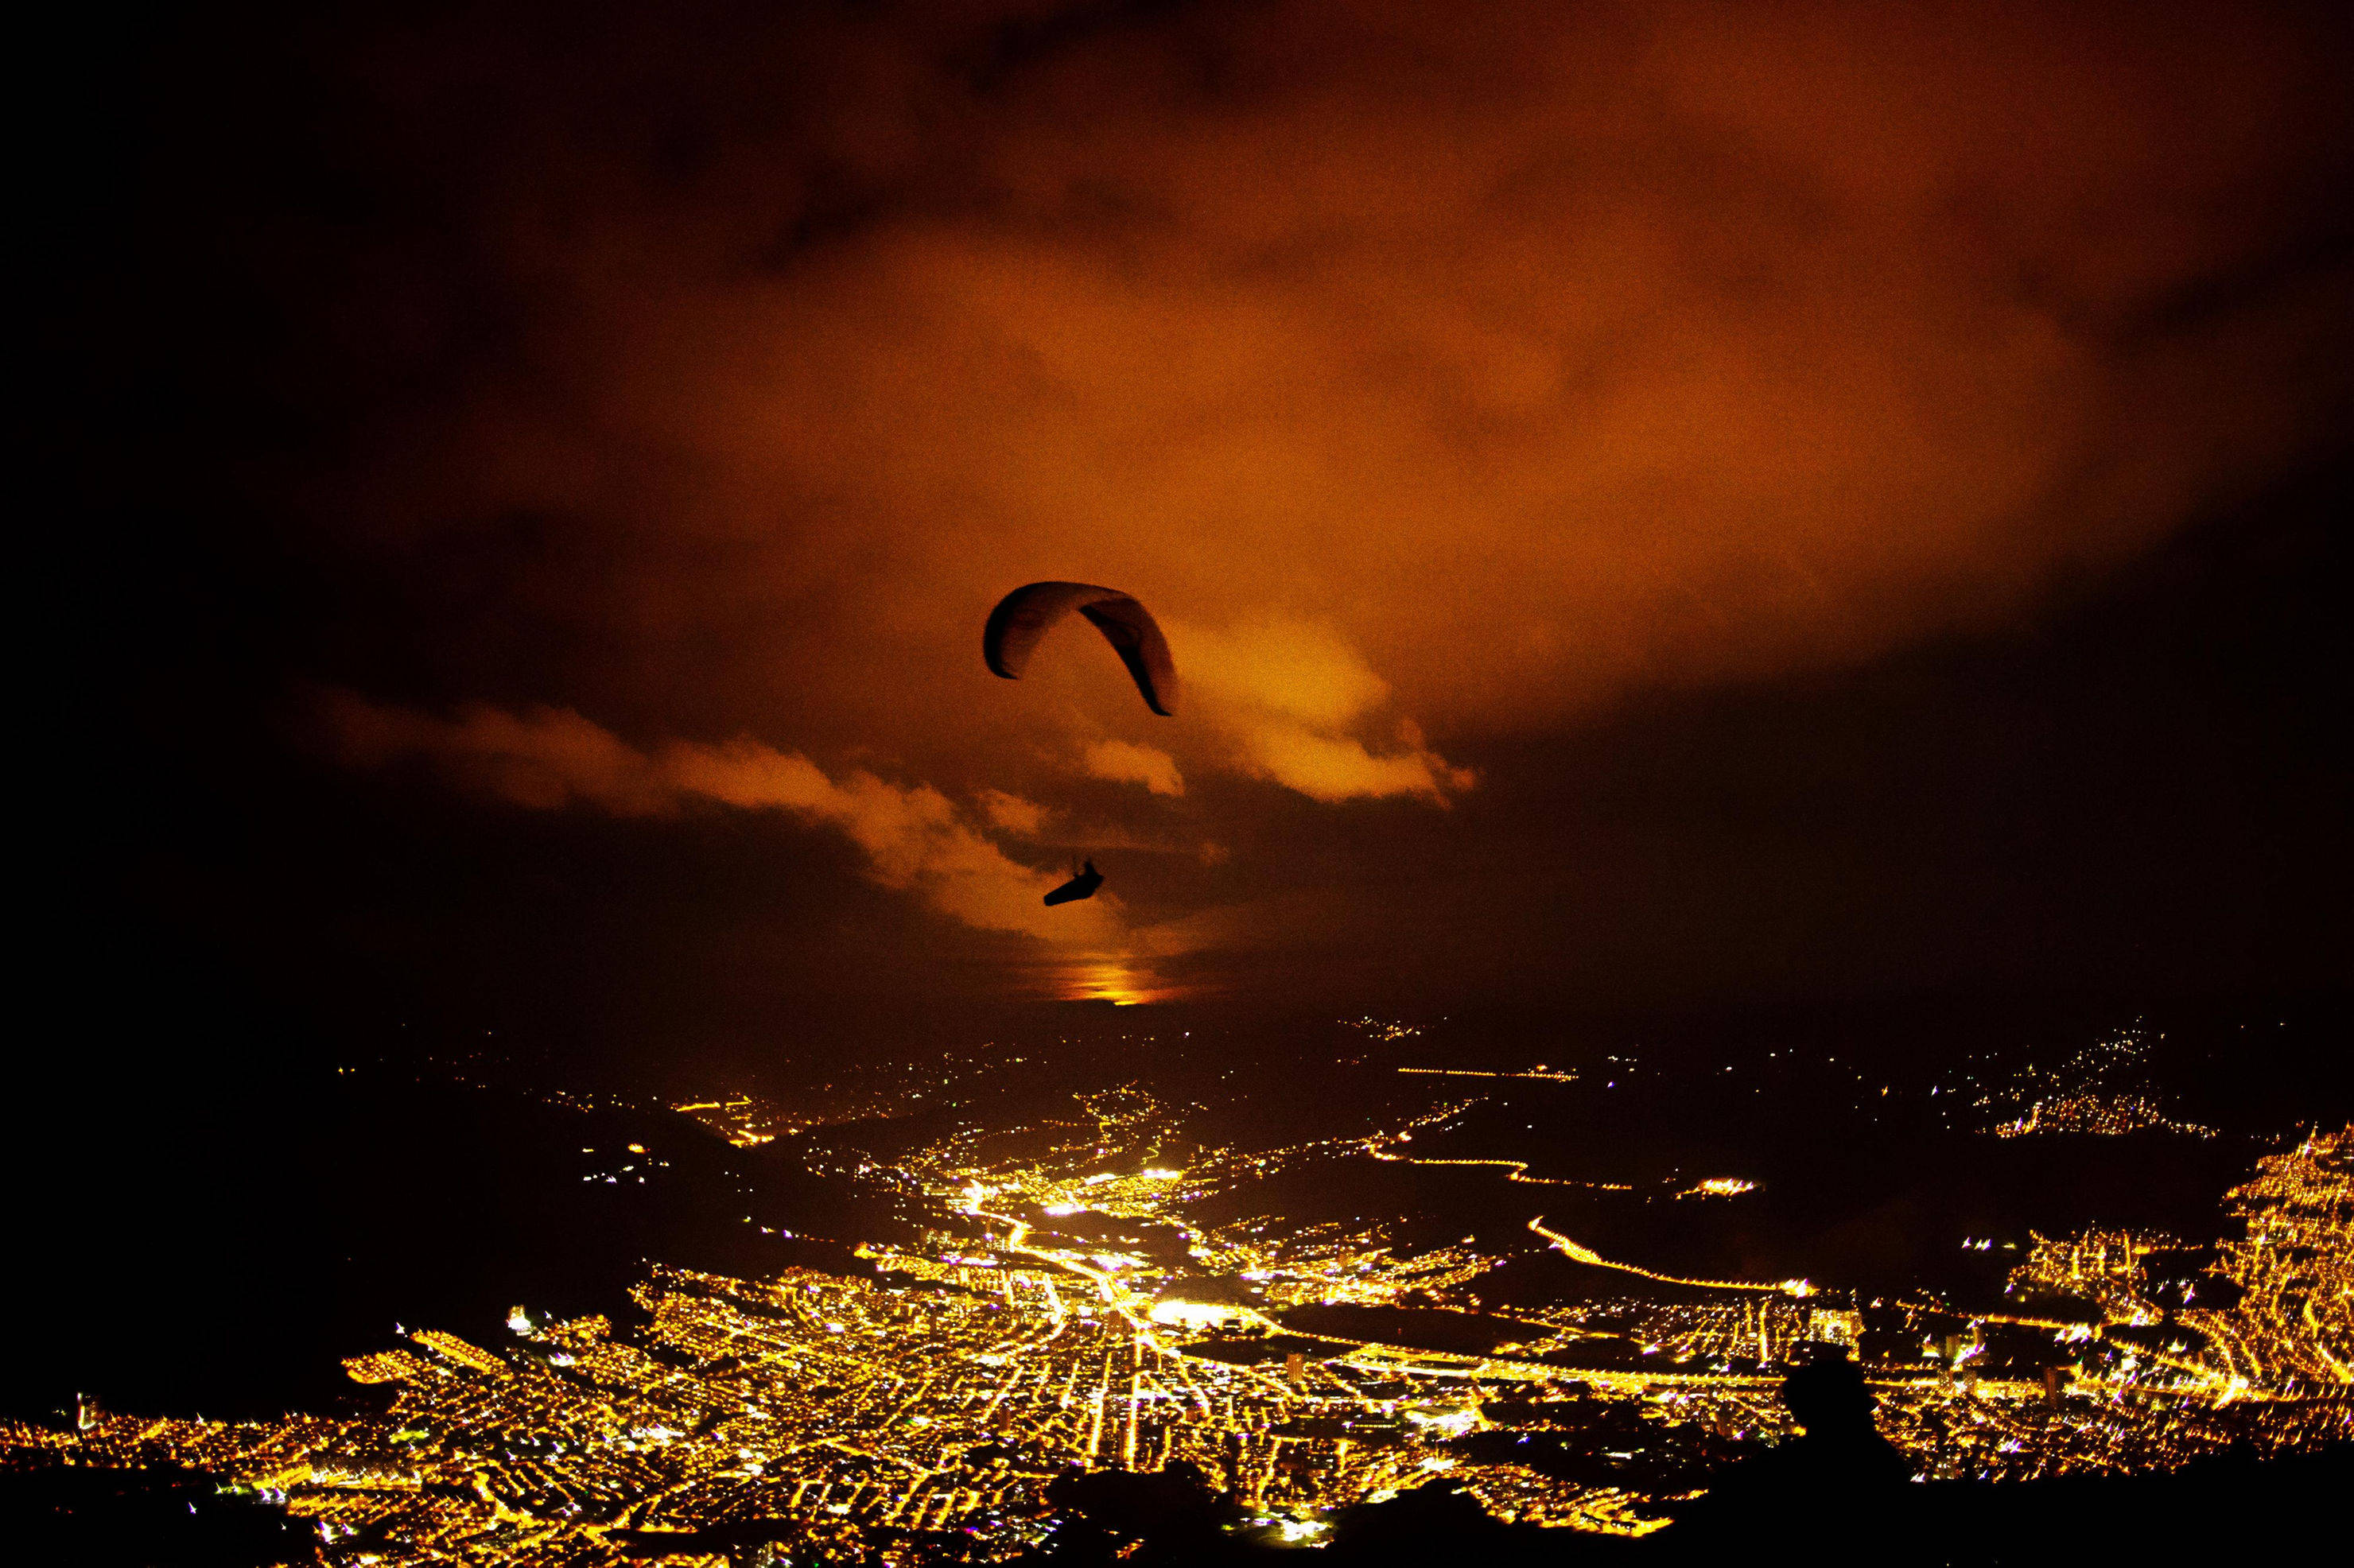 KrystleWright-This is Spanish paraglider Horacio Llorens sweeping over the streets of Medellín